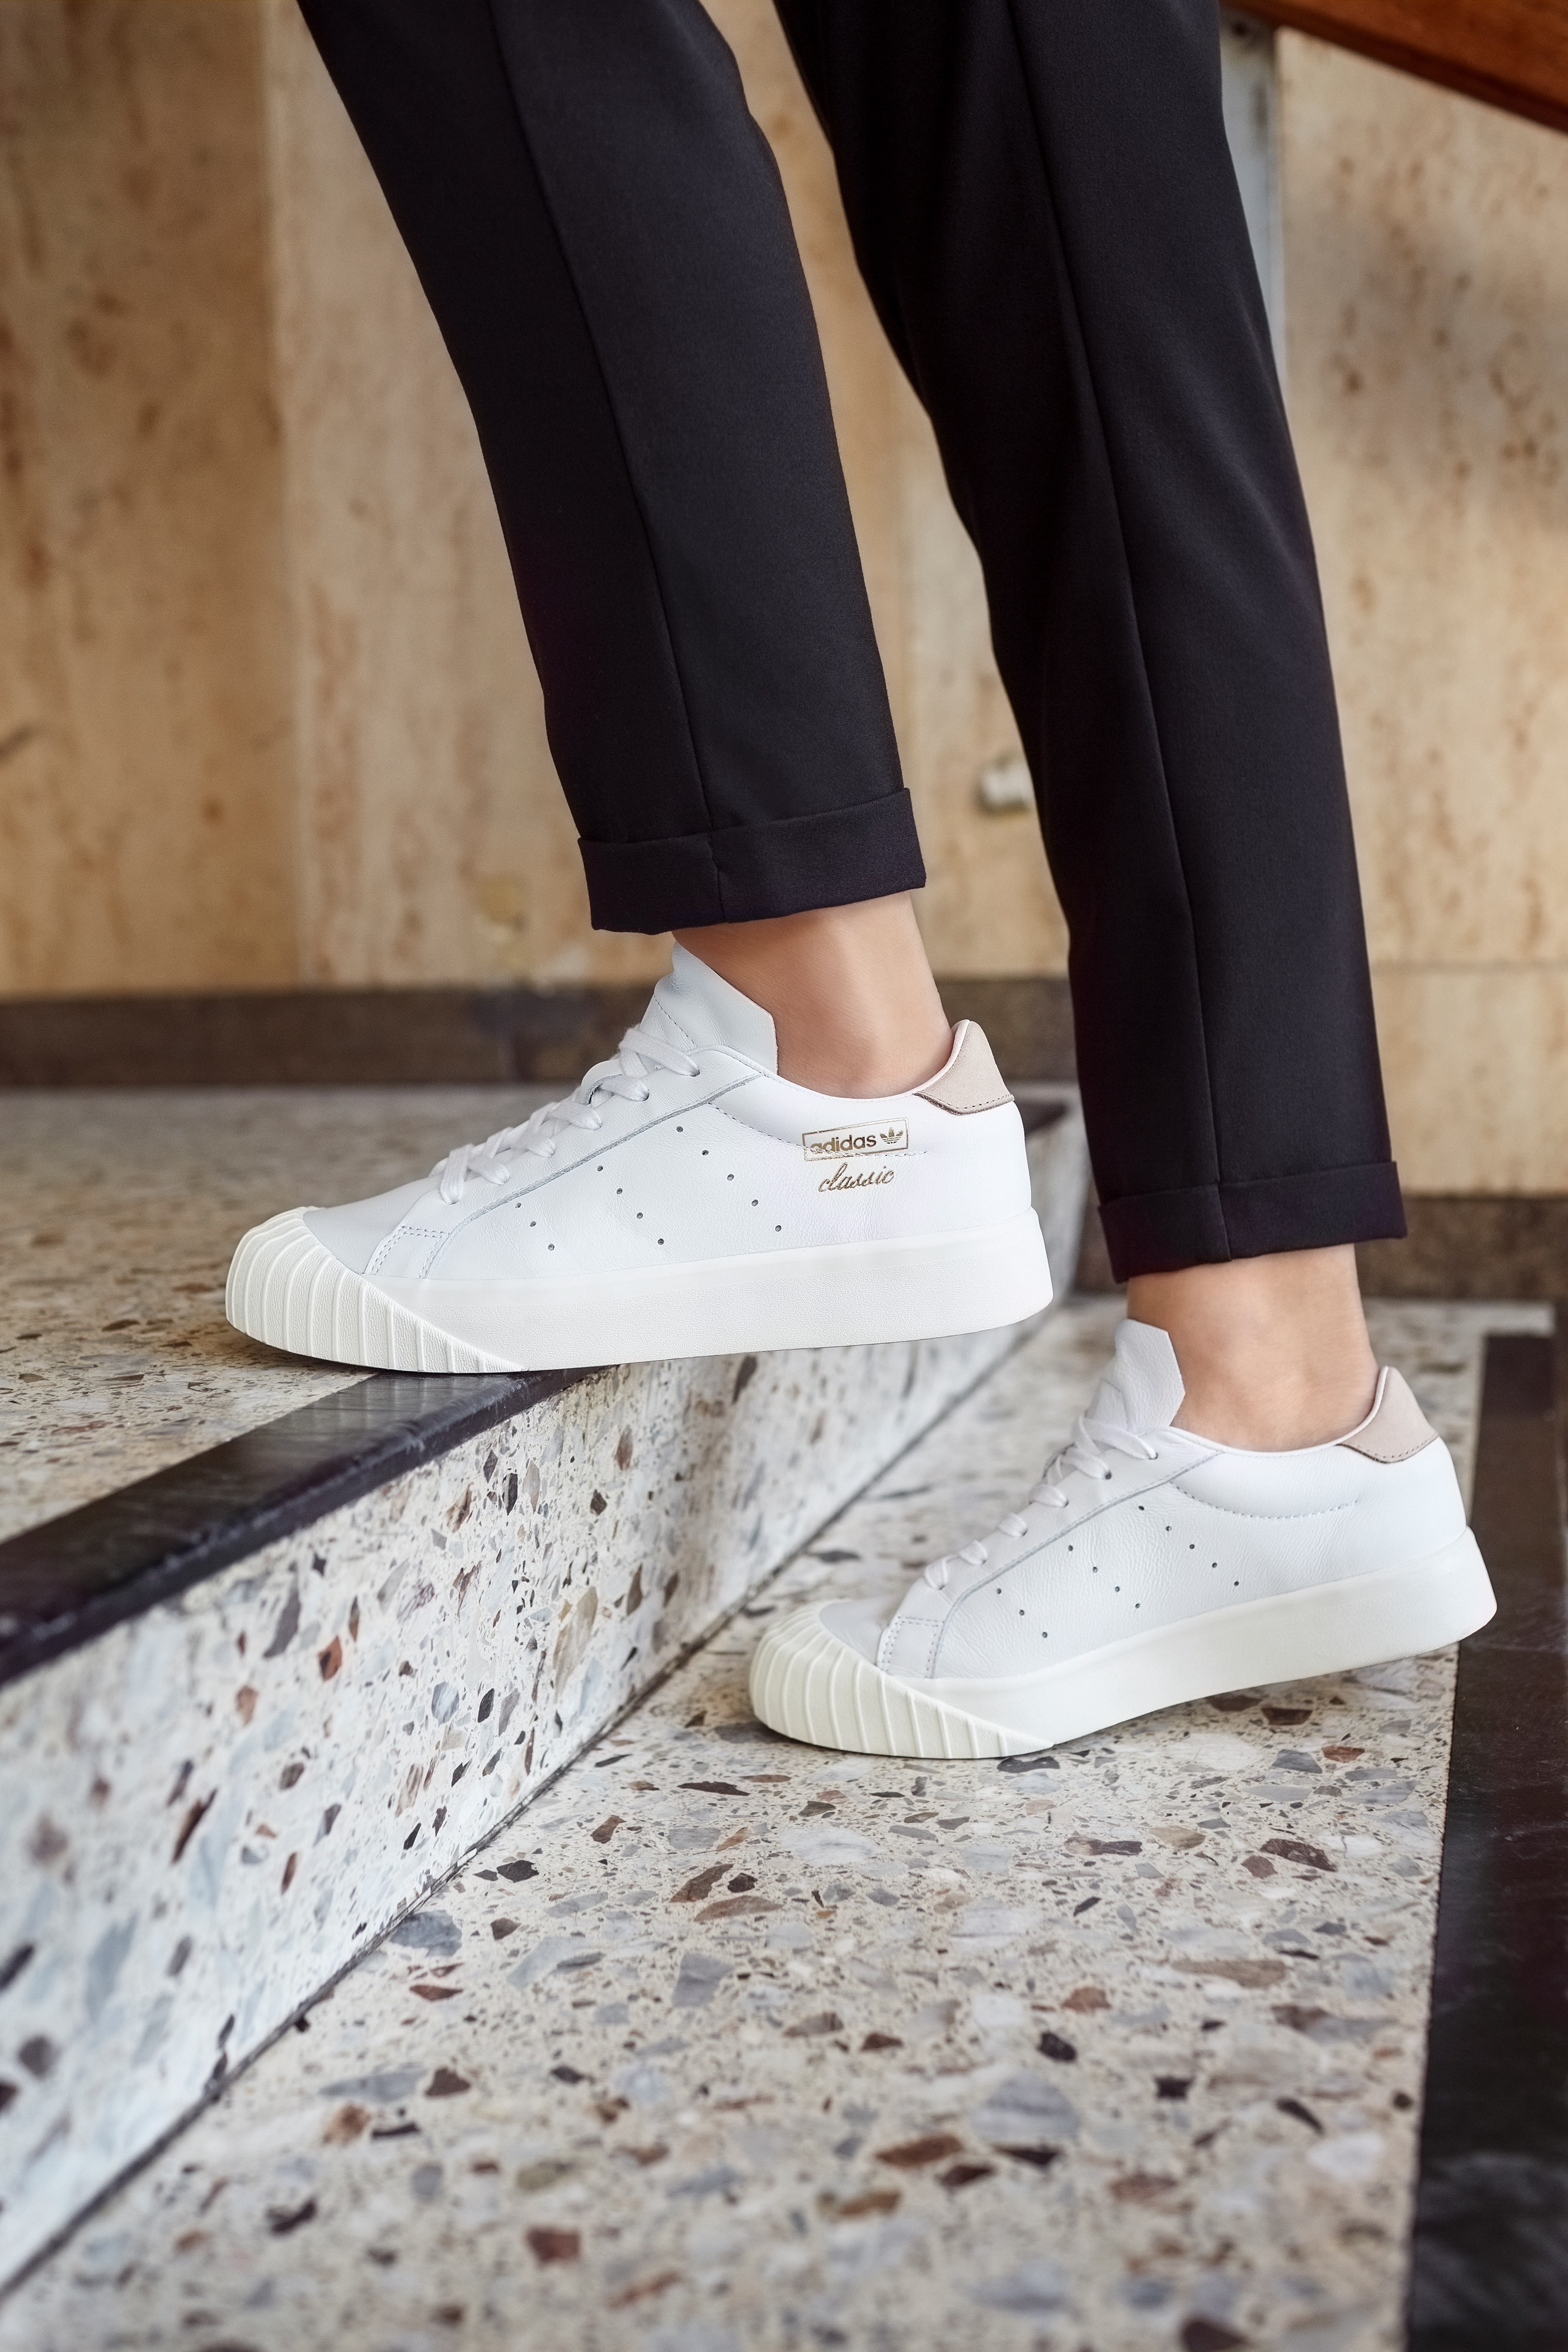 Meet the Newest Silhouette for Women: the adidas Everyn - WearTesters